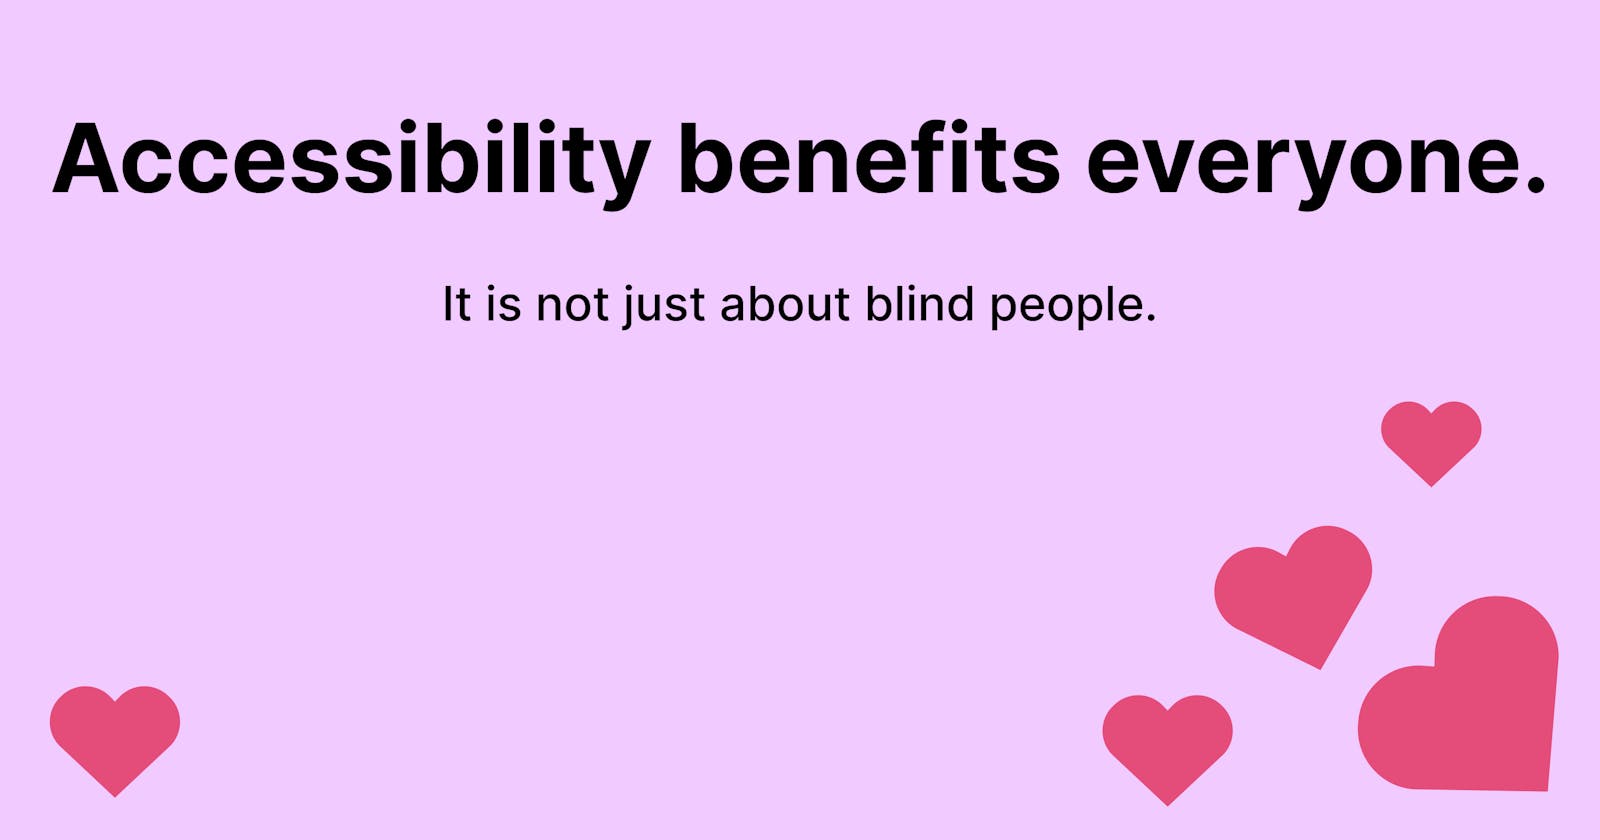 Accessibility benefits everyone